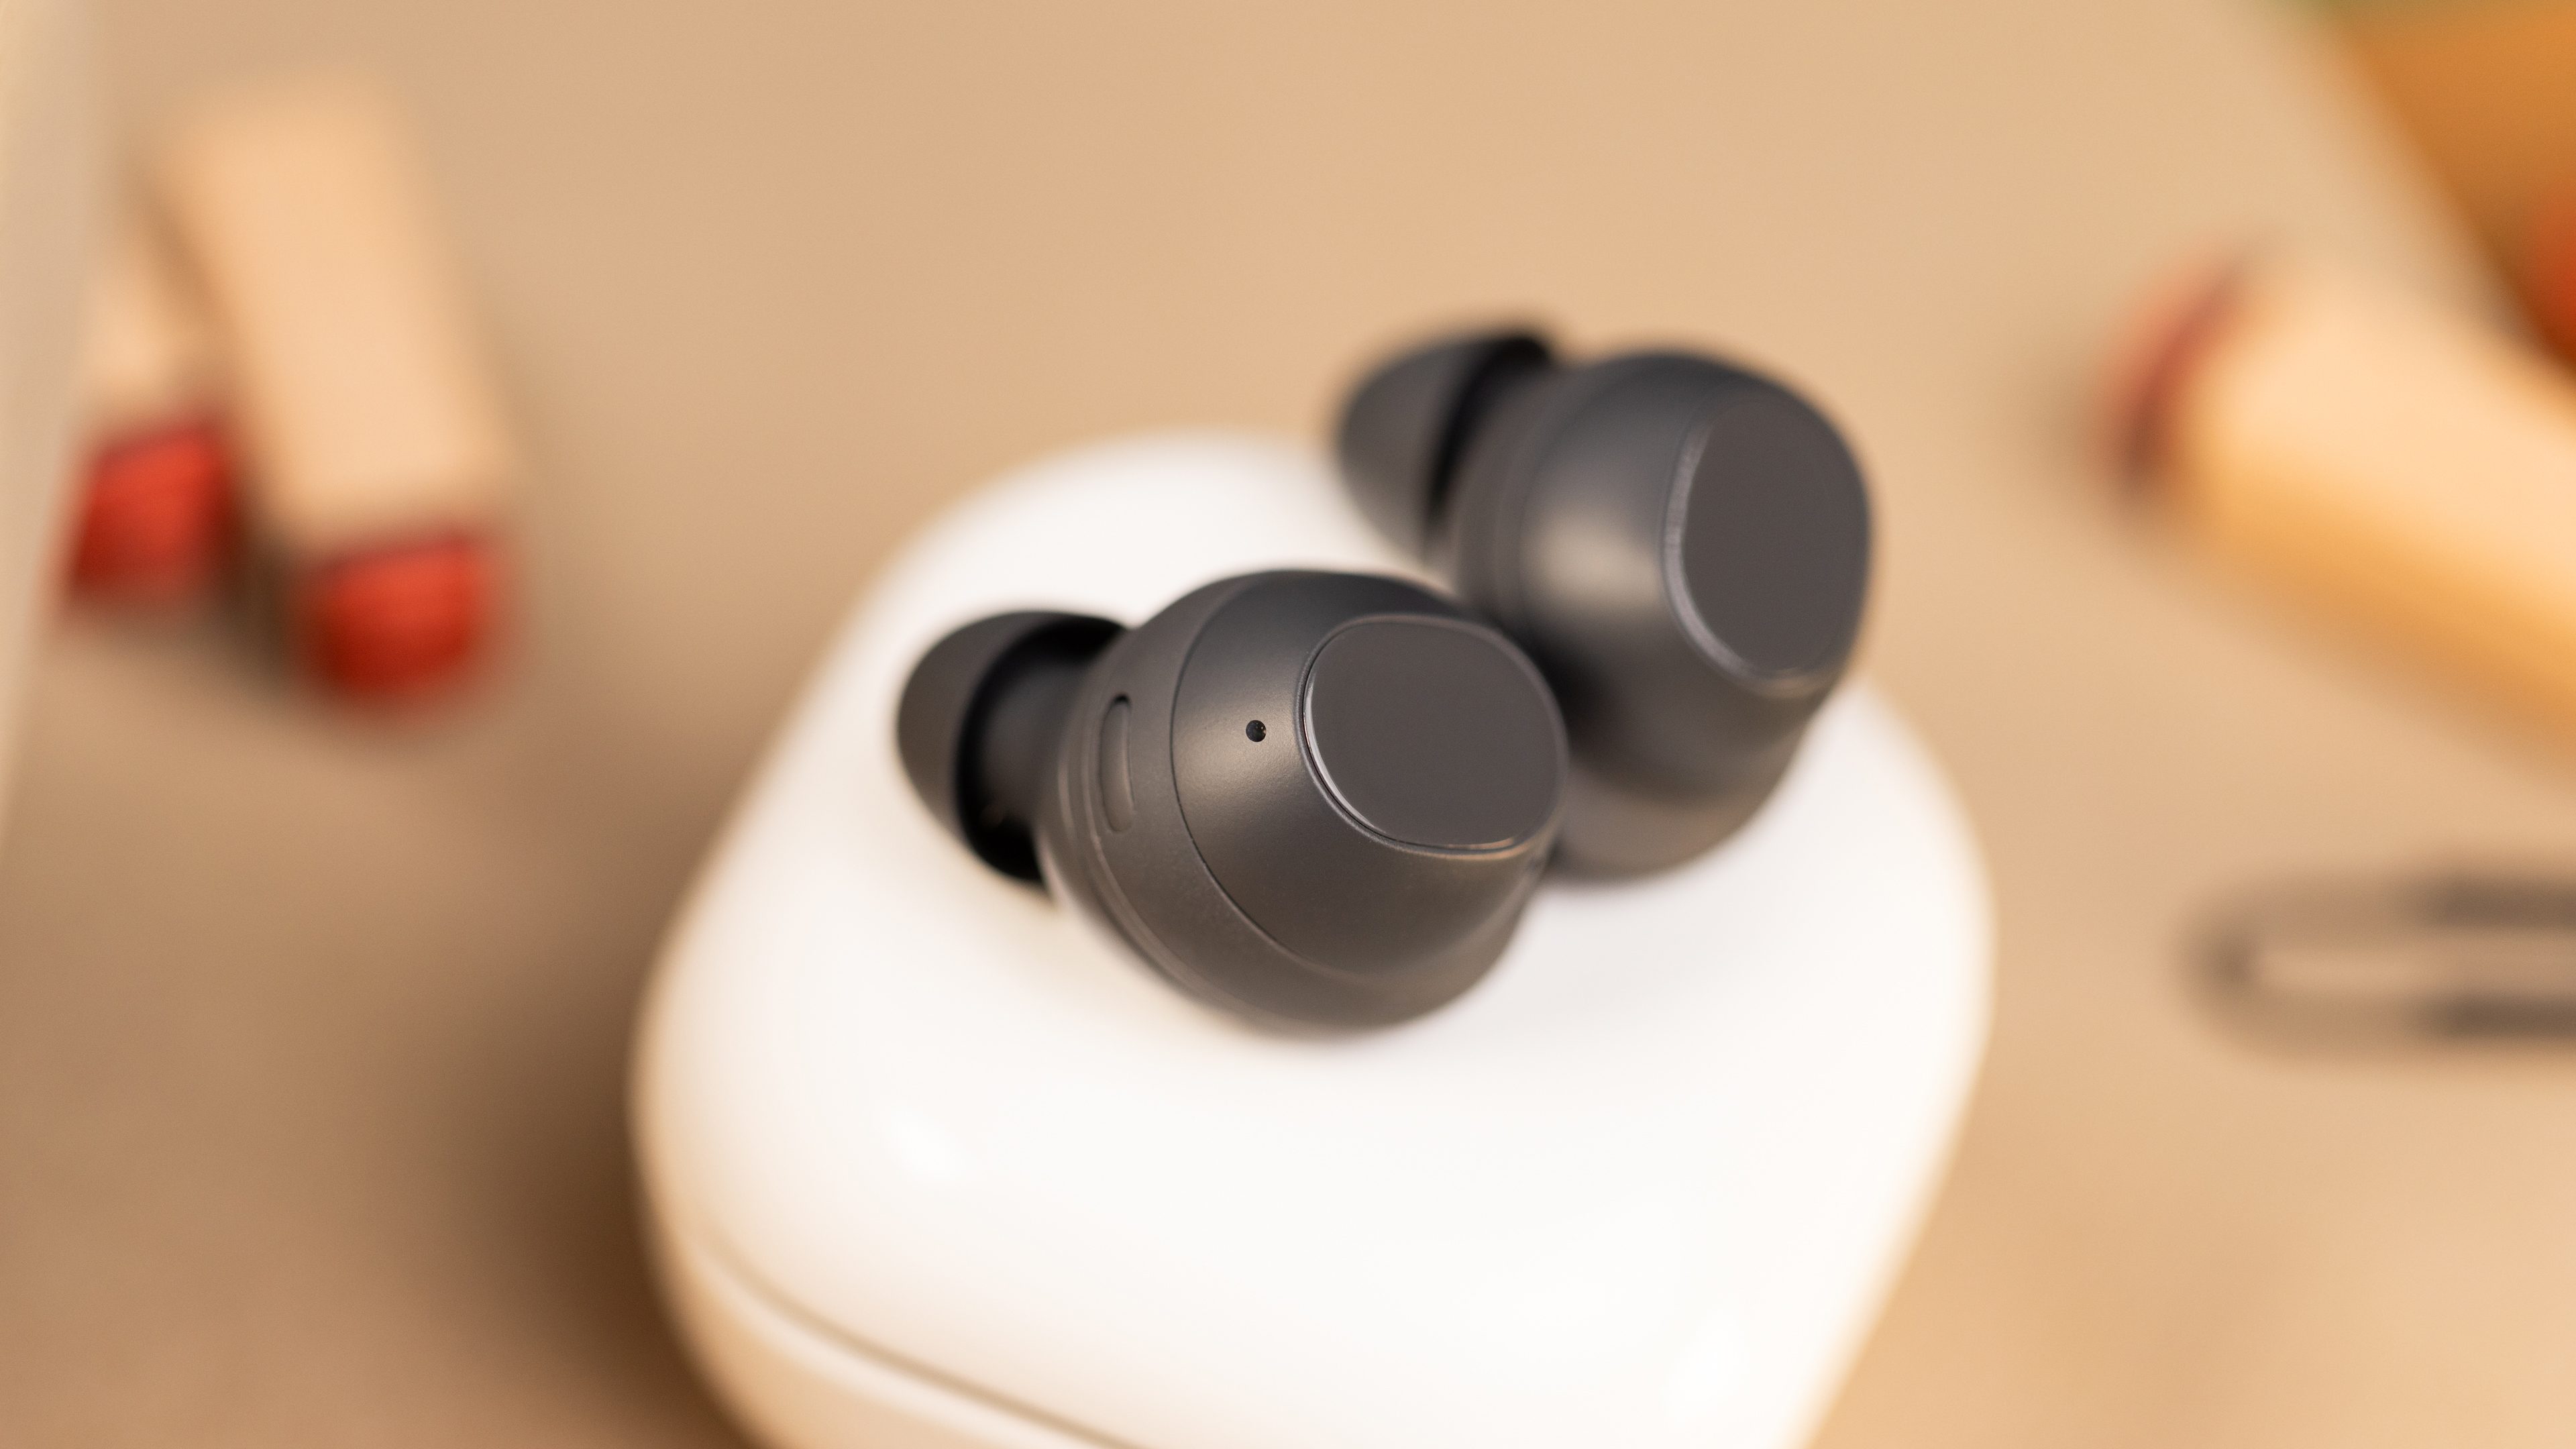 Samsung Galaxy Buds FE with Strong ANC are a Steal at $79 (27% Off)